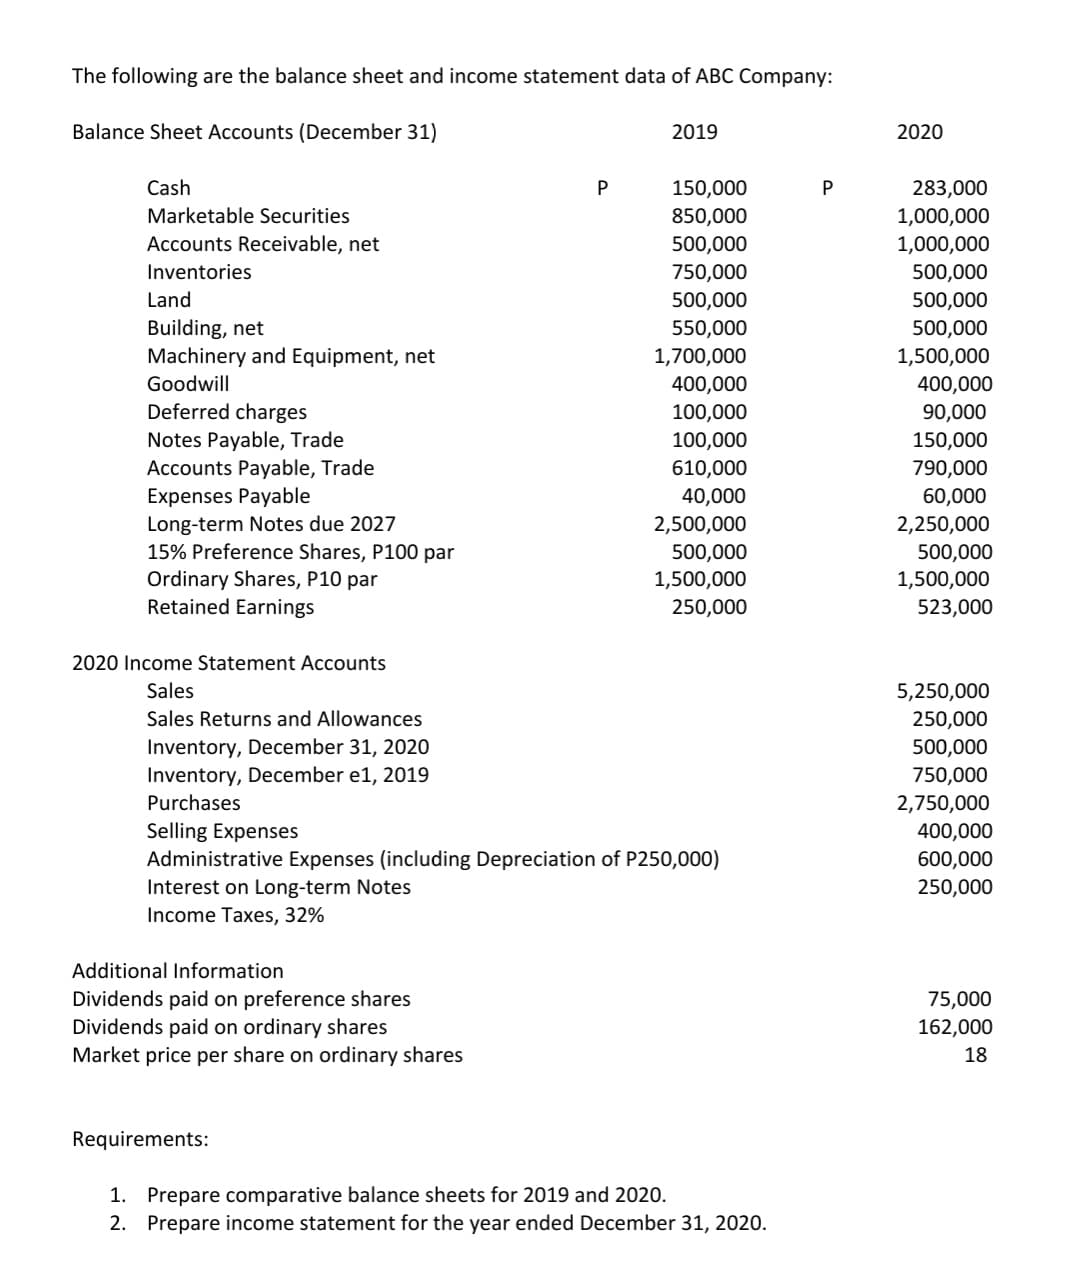 The following are the balance sheet and income statement data of ABC Company:
Balance Sheet Accounts (December 31)
2019
2020
Cash
150,000
283,000
Marketable Securities
850,000
1,000,000
Accounts Receivable, net
500,000
1,000,000
Inventories
750,000
500,000
Land
500,000
500,000
Building, net
Machinery and Equipment, net
550,000
500,000
1,700,000
1,500,000
Goodwill
400,000
400,000
Deferred charges
Notes Payable, Trade
Accounts Payable, Trade
Expenses Payable
Long-term Notes due 2027
15% Preference Shares, P100 par
100,000
90,000
100,000
150,000
610,000
790,000
60,000
2,250,000
40,000
2,500,000
500,000
500,000
1,500,000
Ordinary Shares, P10 par
Retained Earnings
1,500,000
250,000
523,000
2020 Income Statement Accounts
Sales
5,250,000
Sales Returns and Allowances
250,000
Inventory, December 31, 2020
Inventory, December e1, 2019
Purchases
500,000
750,000
2,750,000
Selling Expenses
Administrative Expenses (including Depreciation of P250,000)
Interest on Long-term Notes
400,000
600,000
250,000
Income Taxes, 32%
Additional Information
Dividends paid on preference shares
Dividends paid on ordinary shares
Market price per share on ordinary shares
75,000
162,000
18
Requirements:
1. Prepare comparative balance sheets for 2019 and 2020.
2. Prepare income statement for the year ended December 31, 2020.
